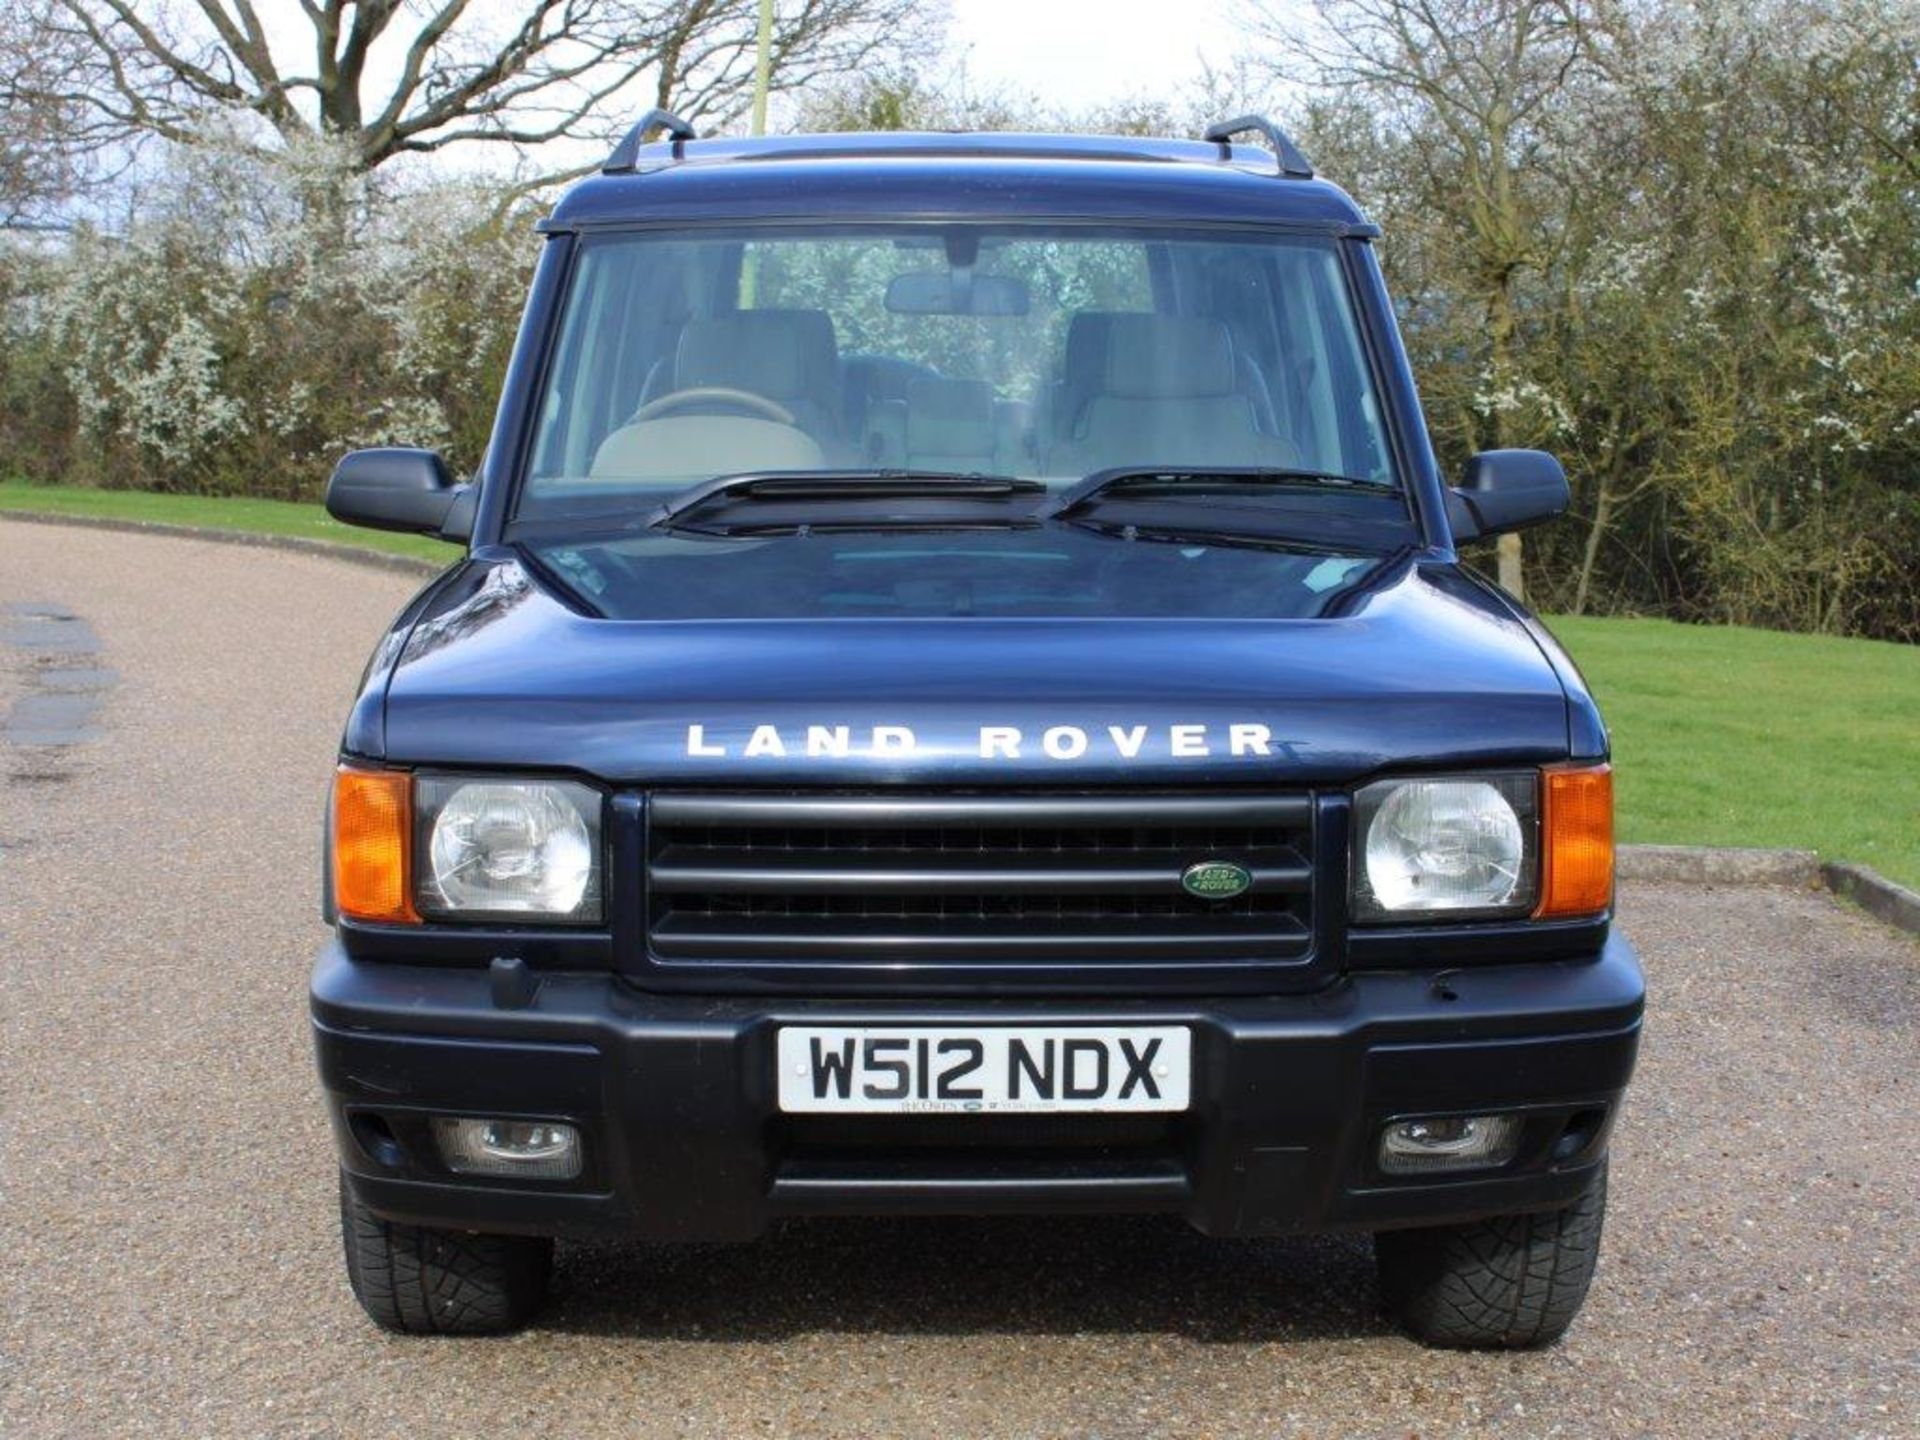 2000 Land Rover Discovery II V8 ES Auto - Image 2 of 14